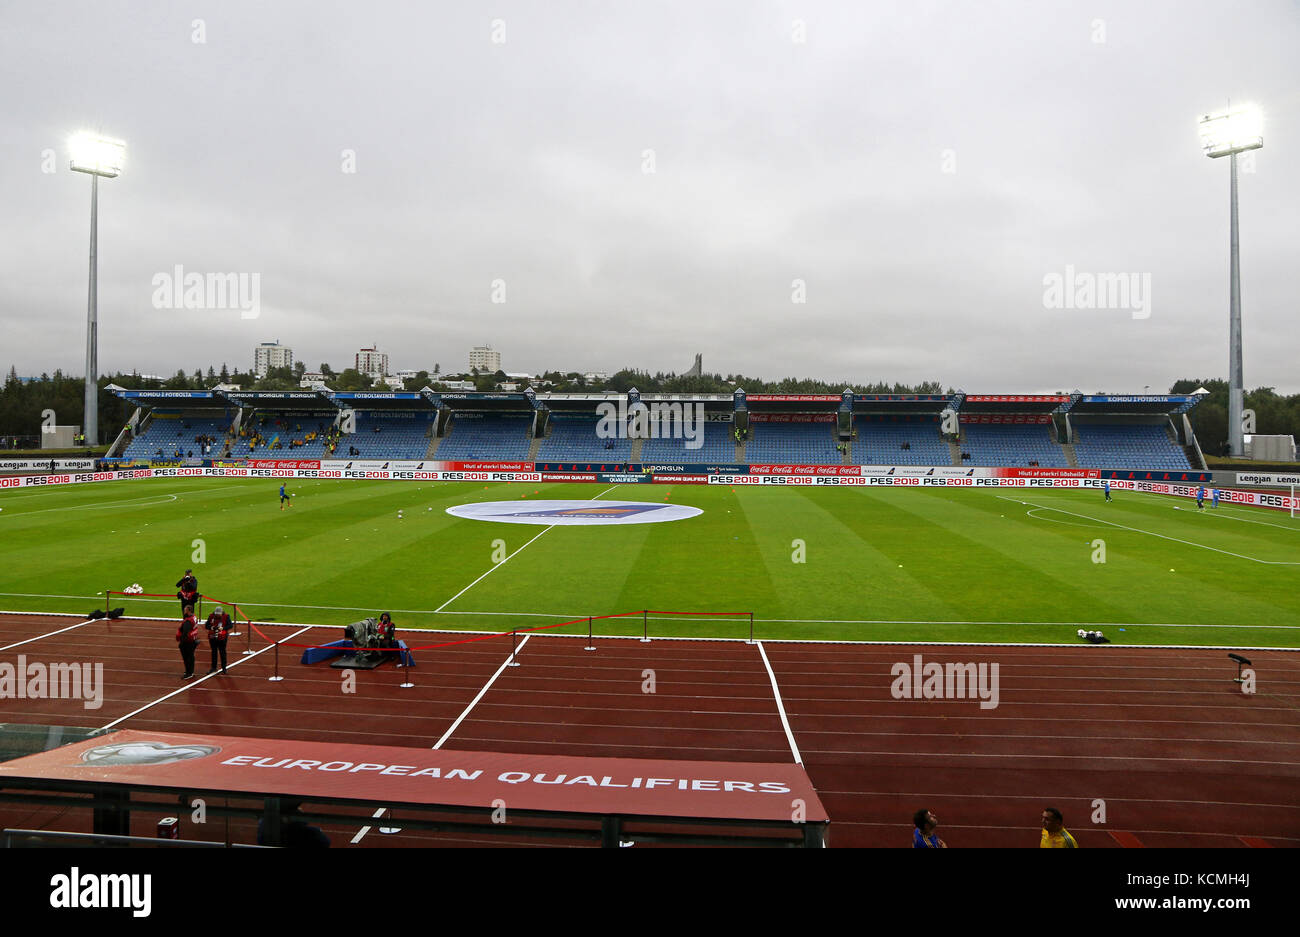 REYKJAVIK, ICELAND - SEPTEMBER 5, 2017: Panoramic view of Laugardalsvollur stadium before FIFA World Cup 2018 qualifying game Iceland v Ukraine in Rey Stock Photo